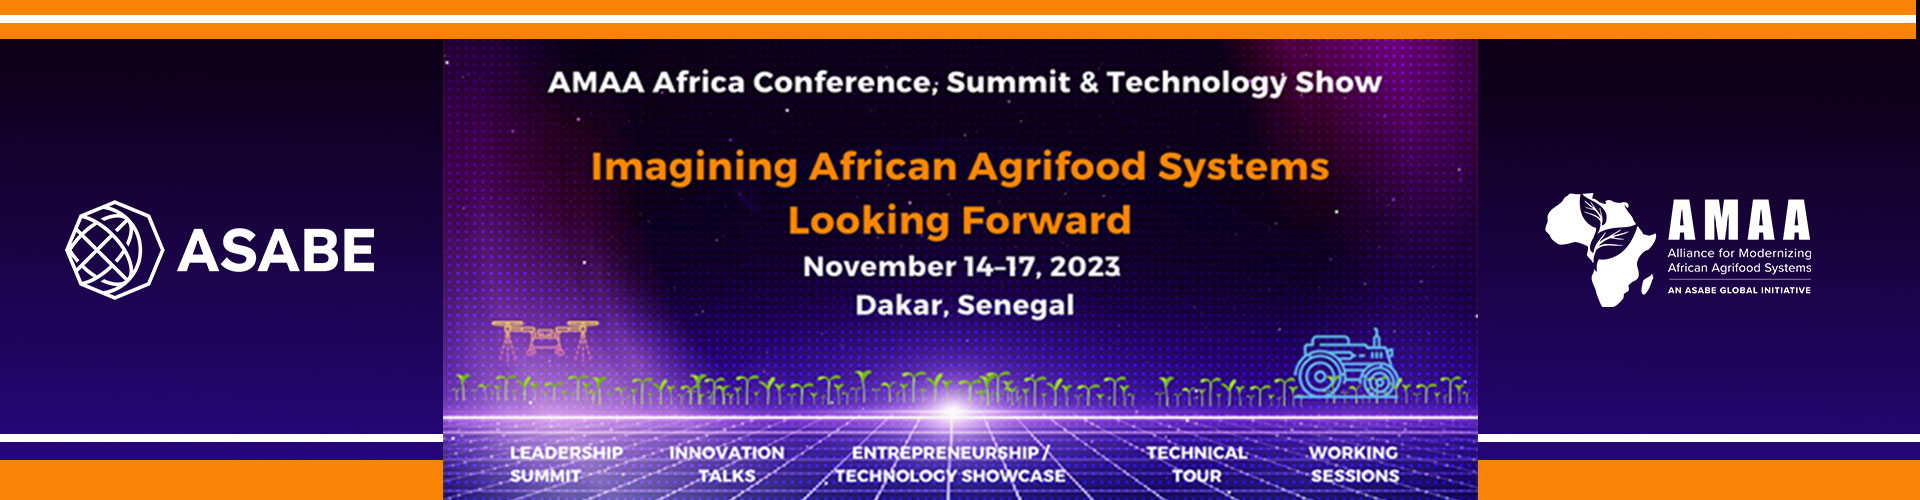 Imagining African Agrifood Systems